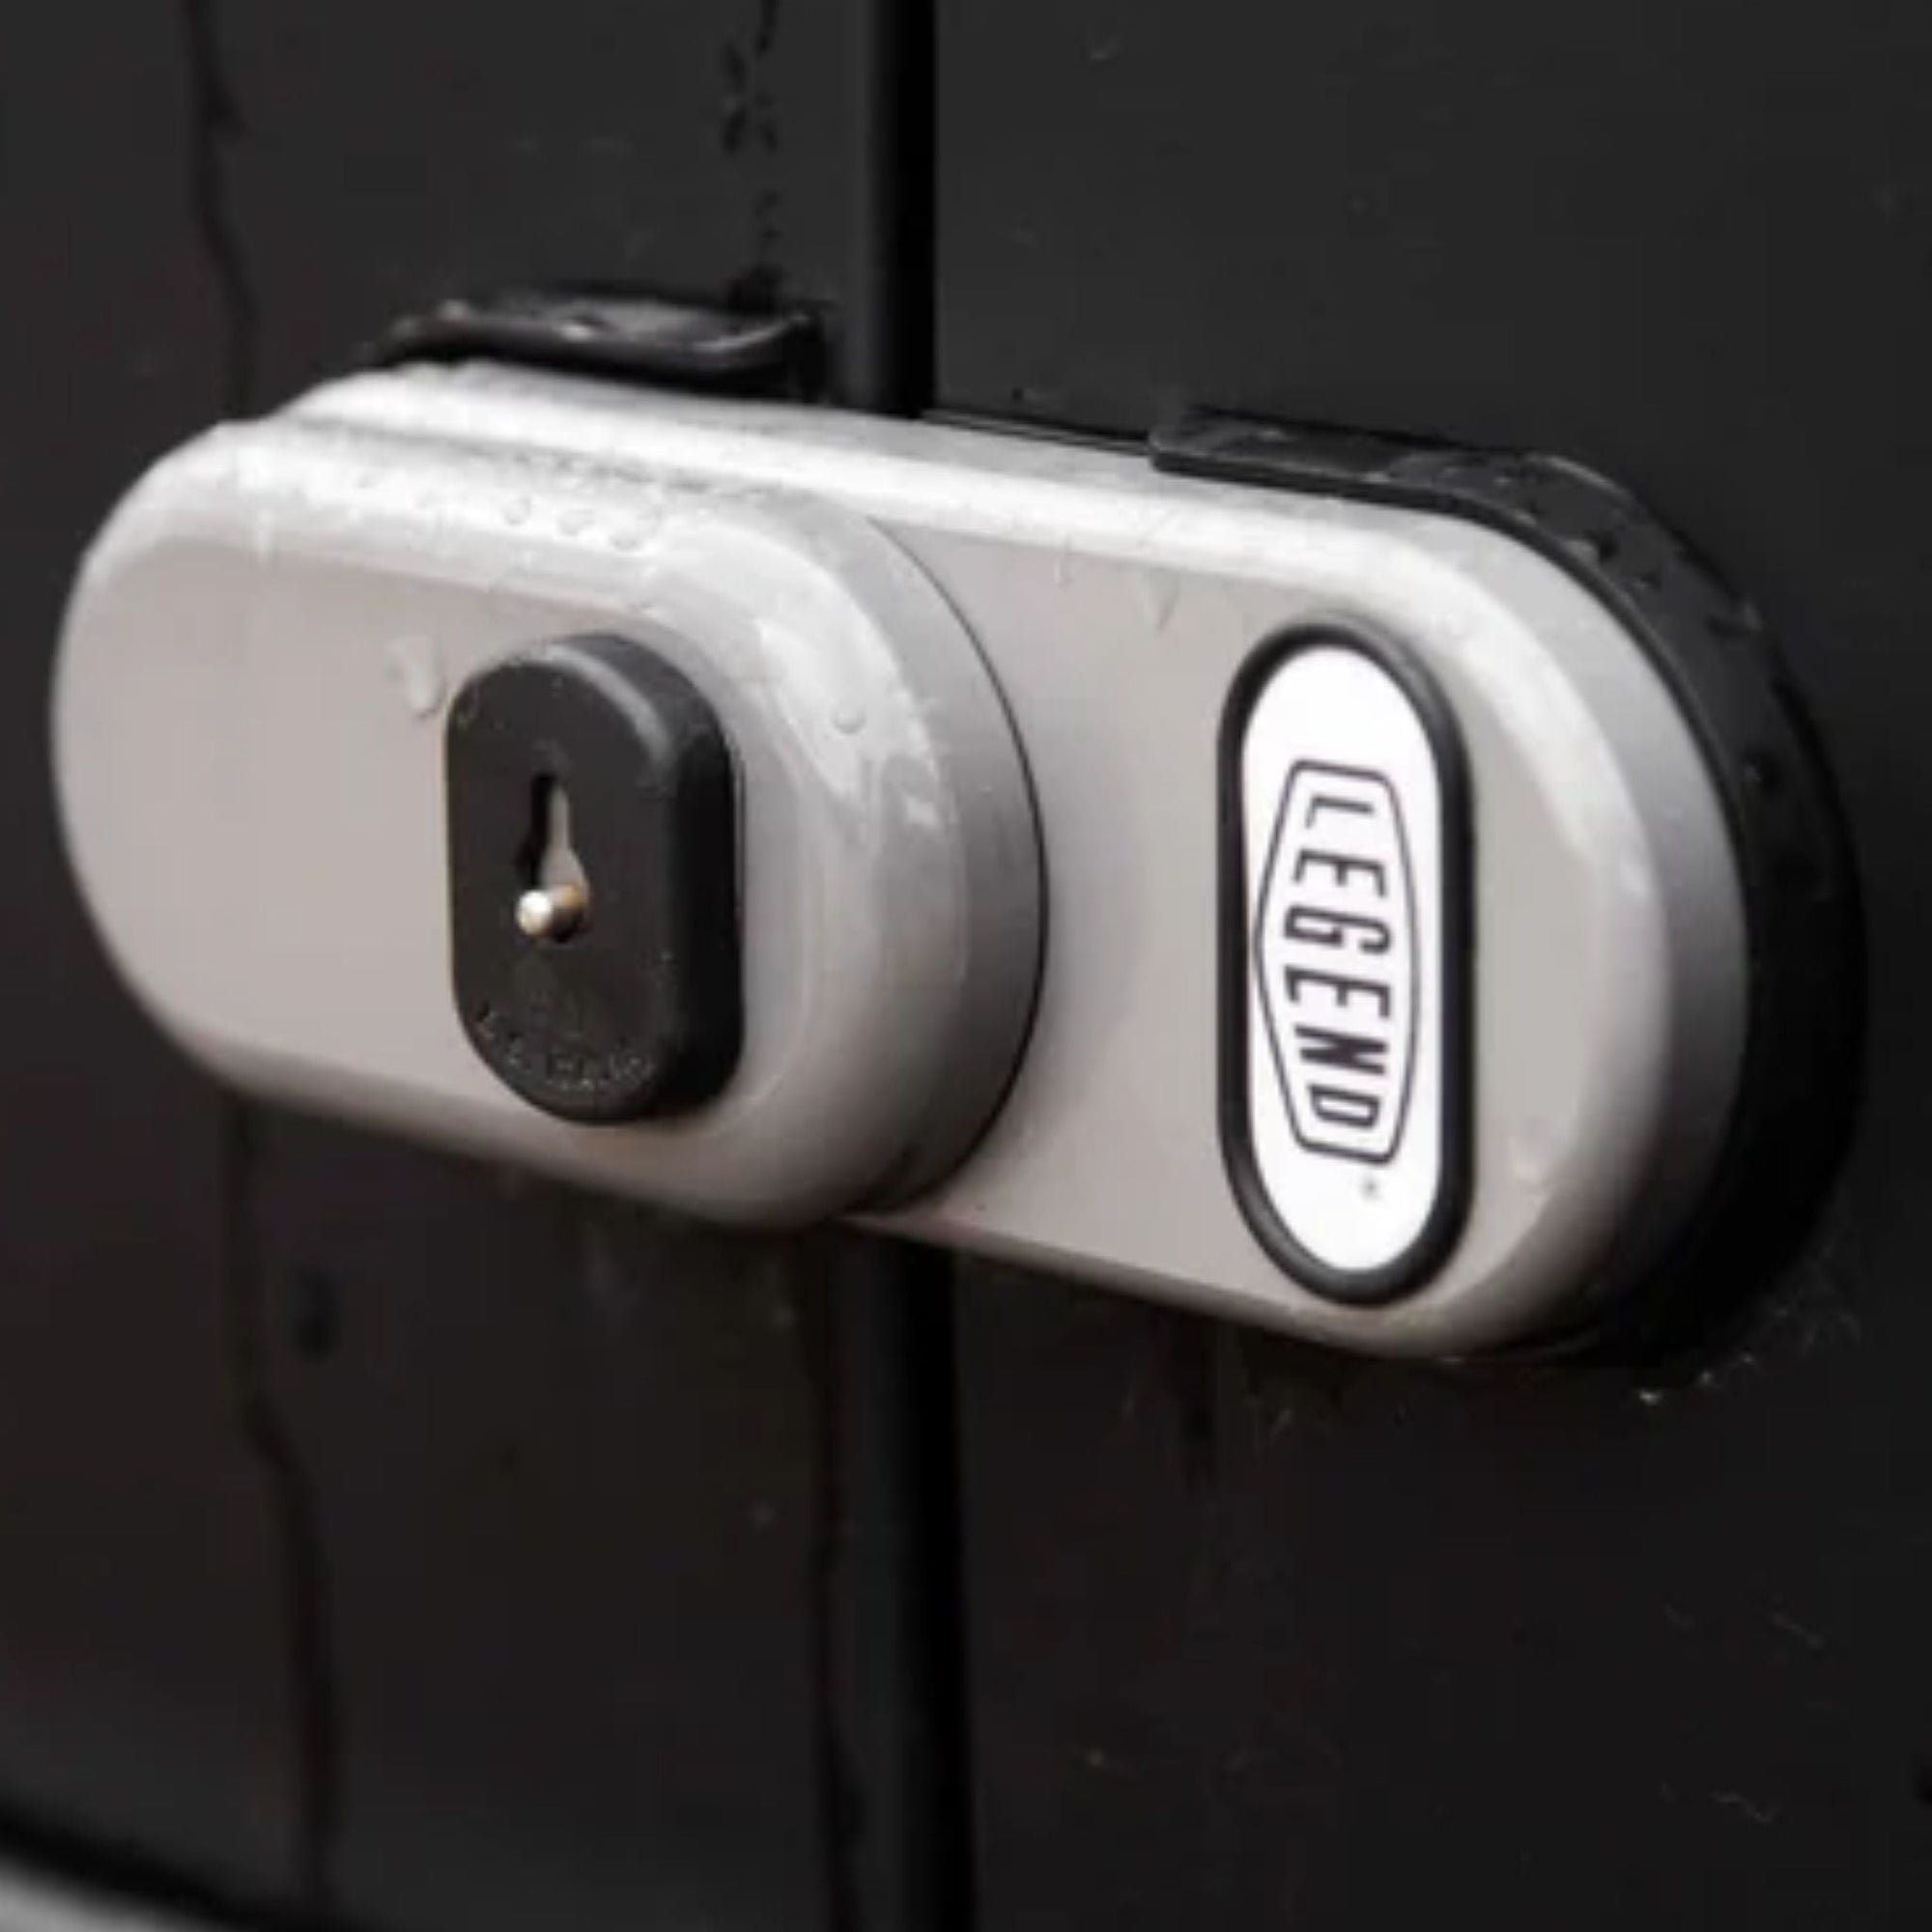 Introducing Legend's New Securi-Lock High Security Vehicle Door Lock That Prevents Cargo Theft In High Crime Urban Areas and Protects Trucks With Toosl and Equipment - The Lock Source